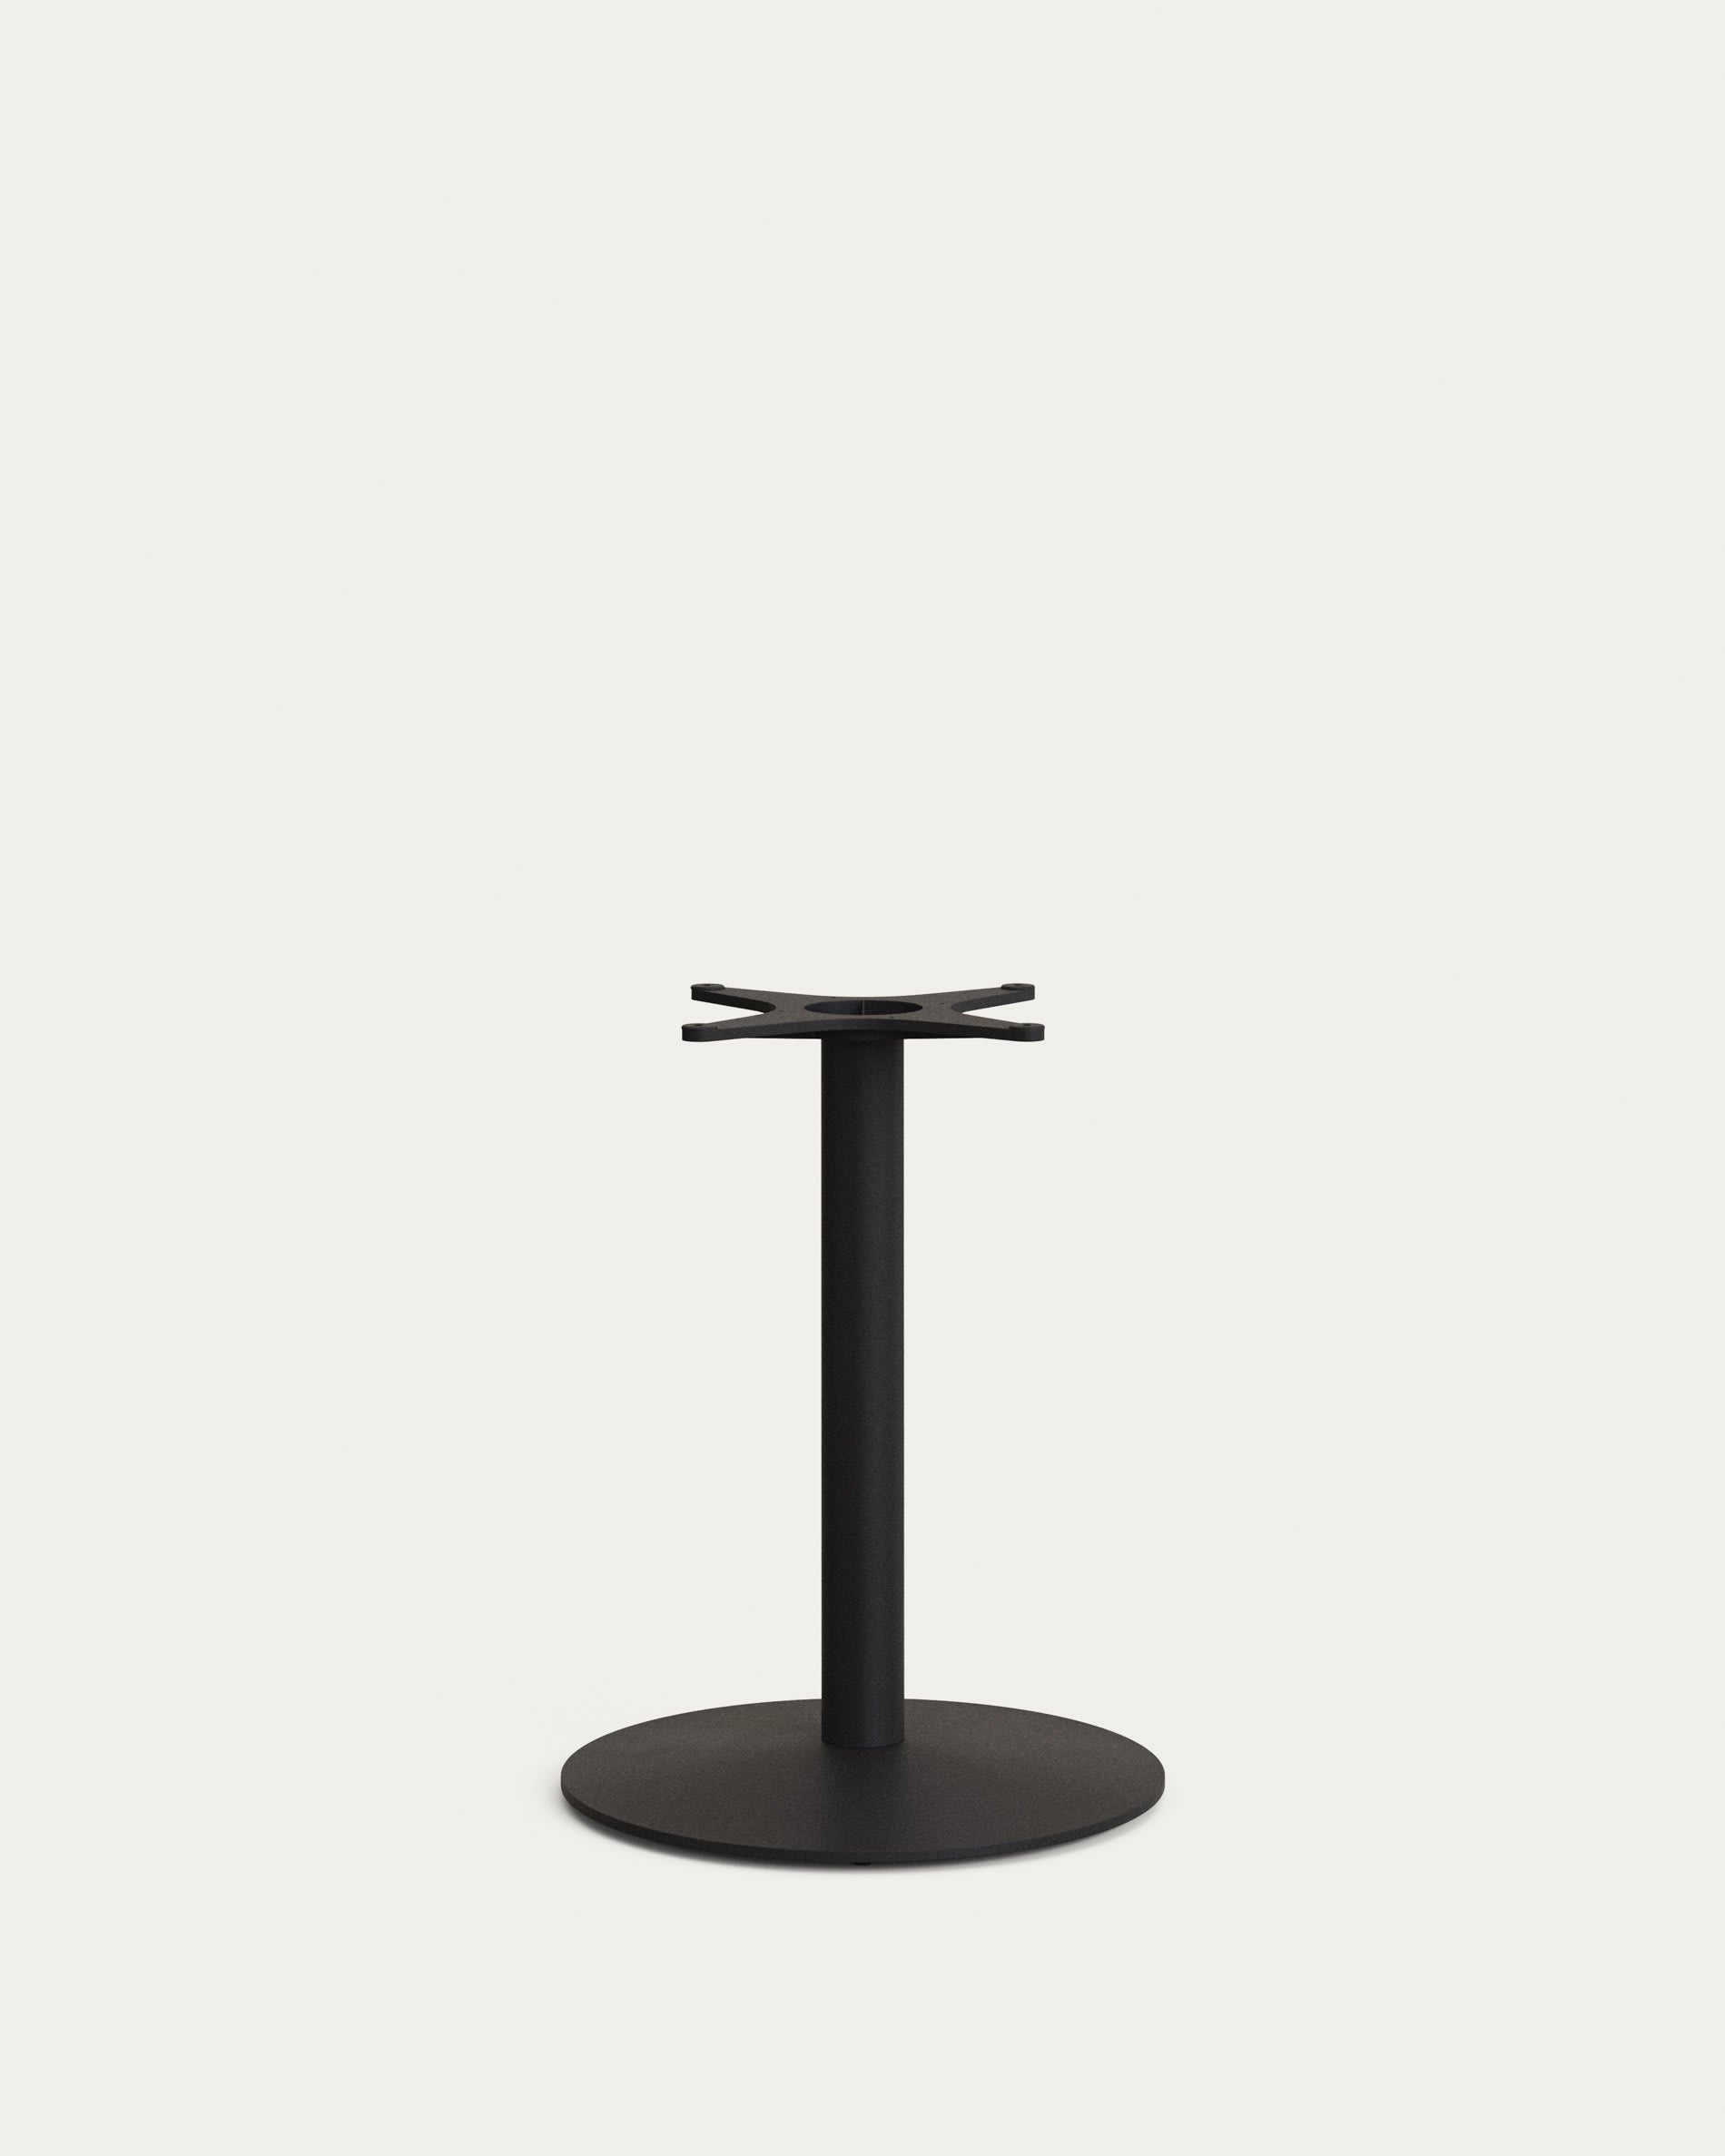 Esilda bar-table leg with large round metal base in a painted black finish